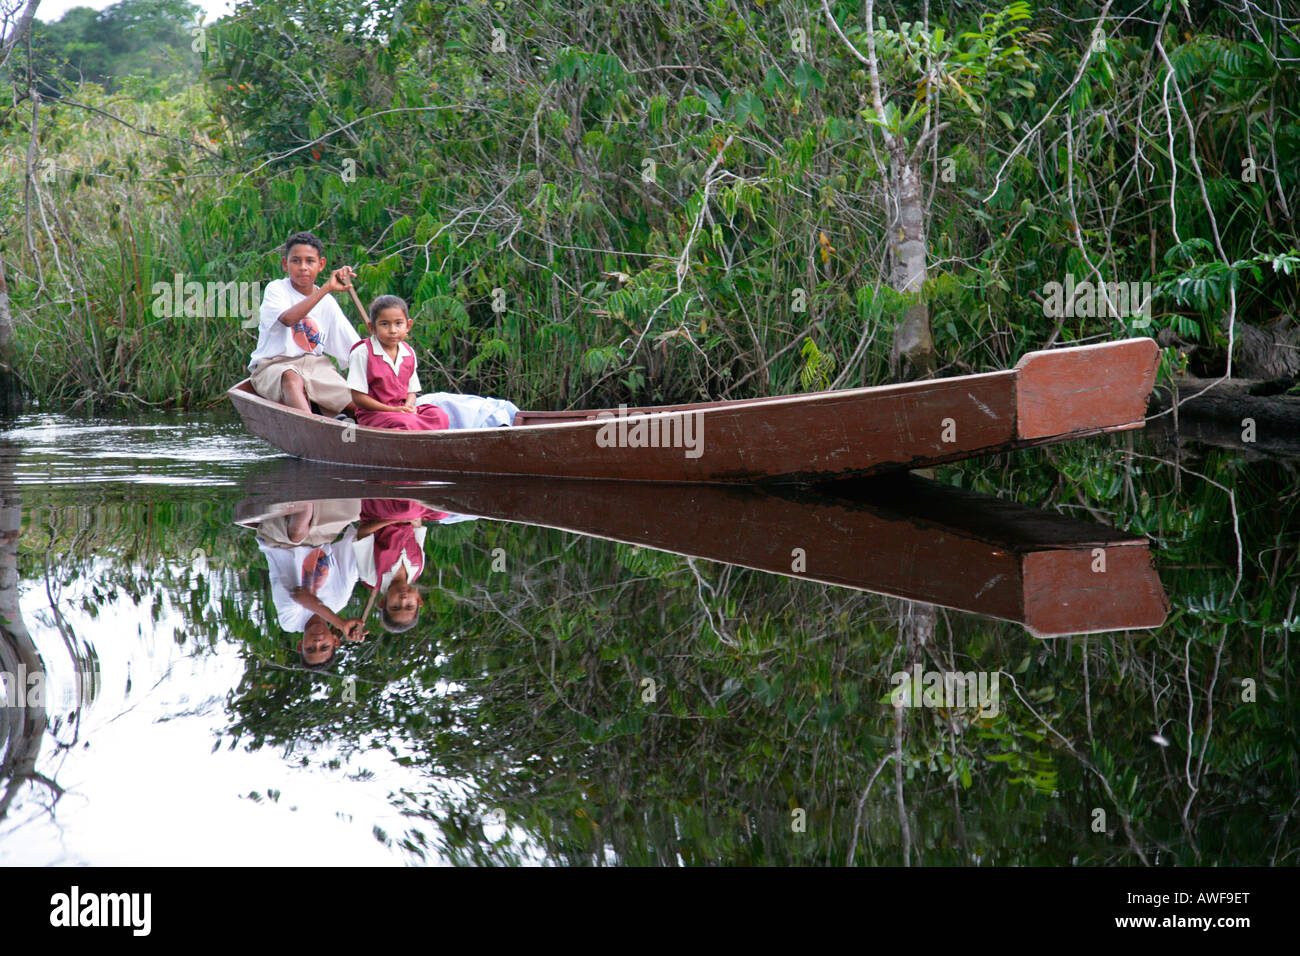 Boy picking up his younger sister from school with his boat, Arawak natives, Santa Mission, Guyana, South America Stock Photo